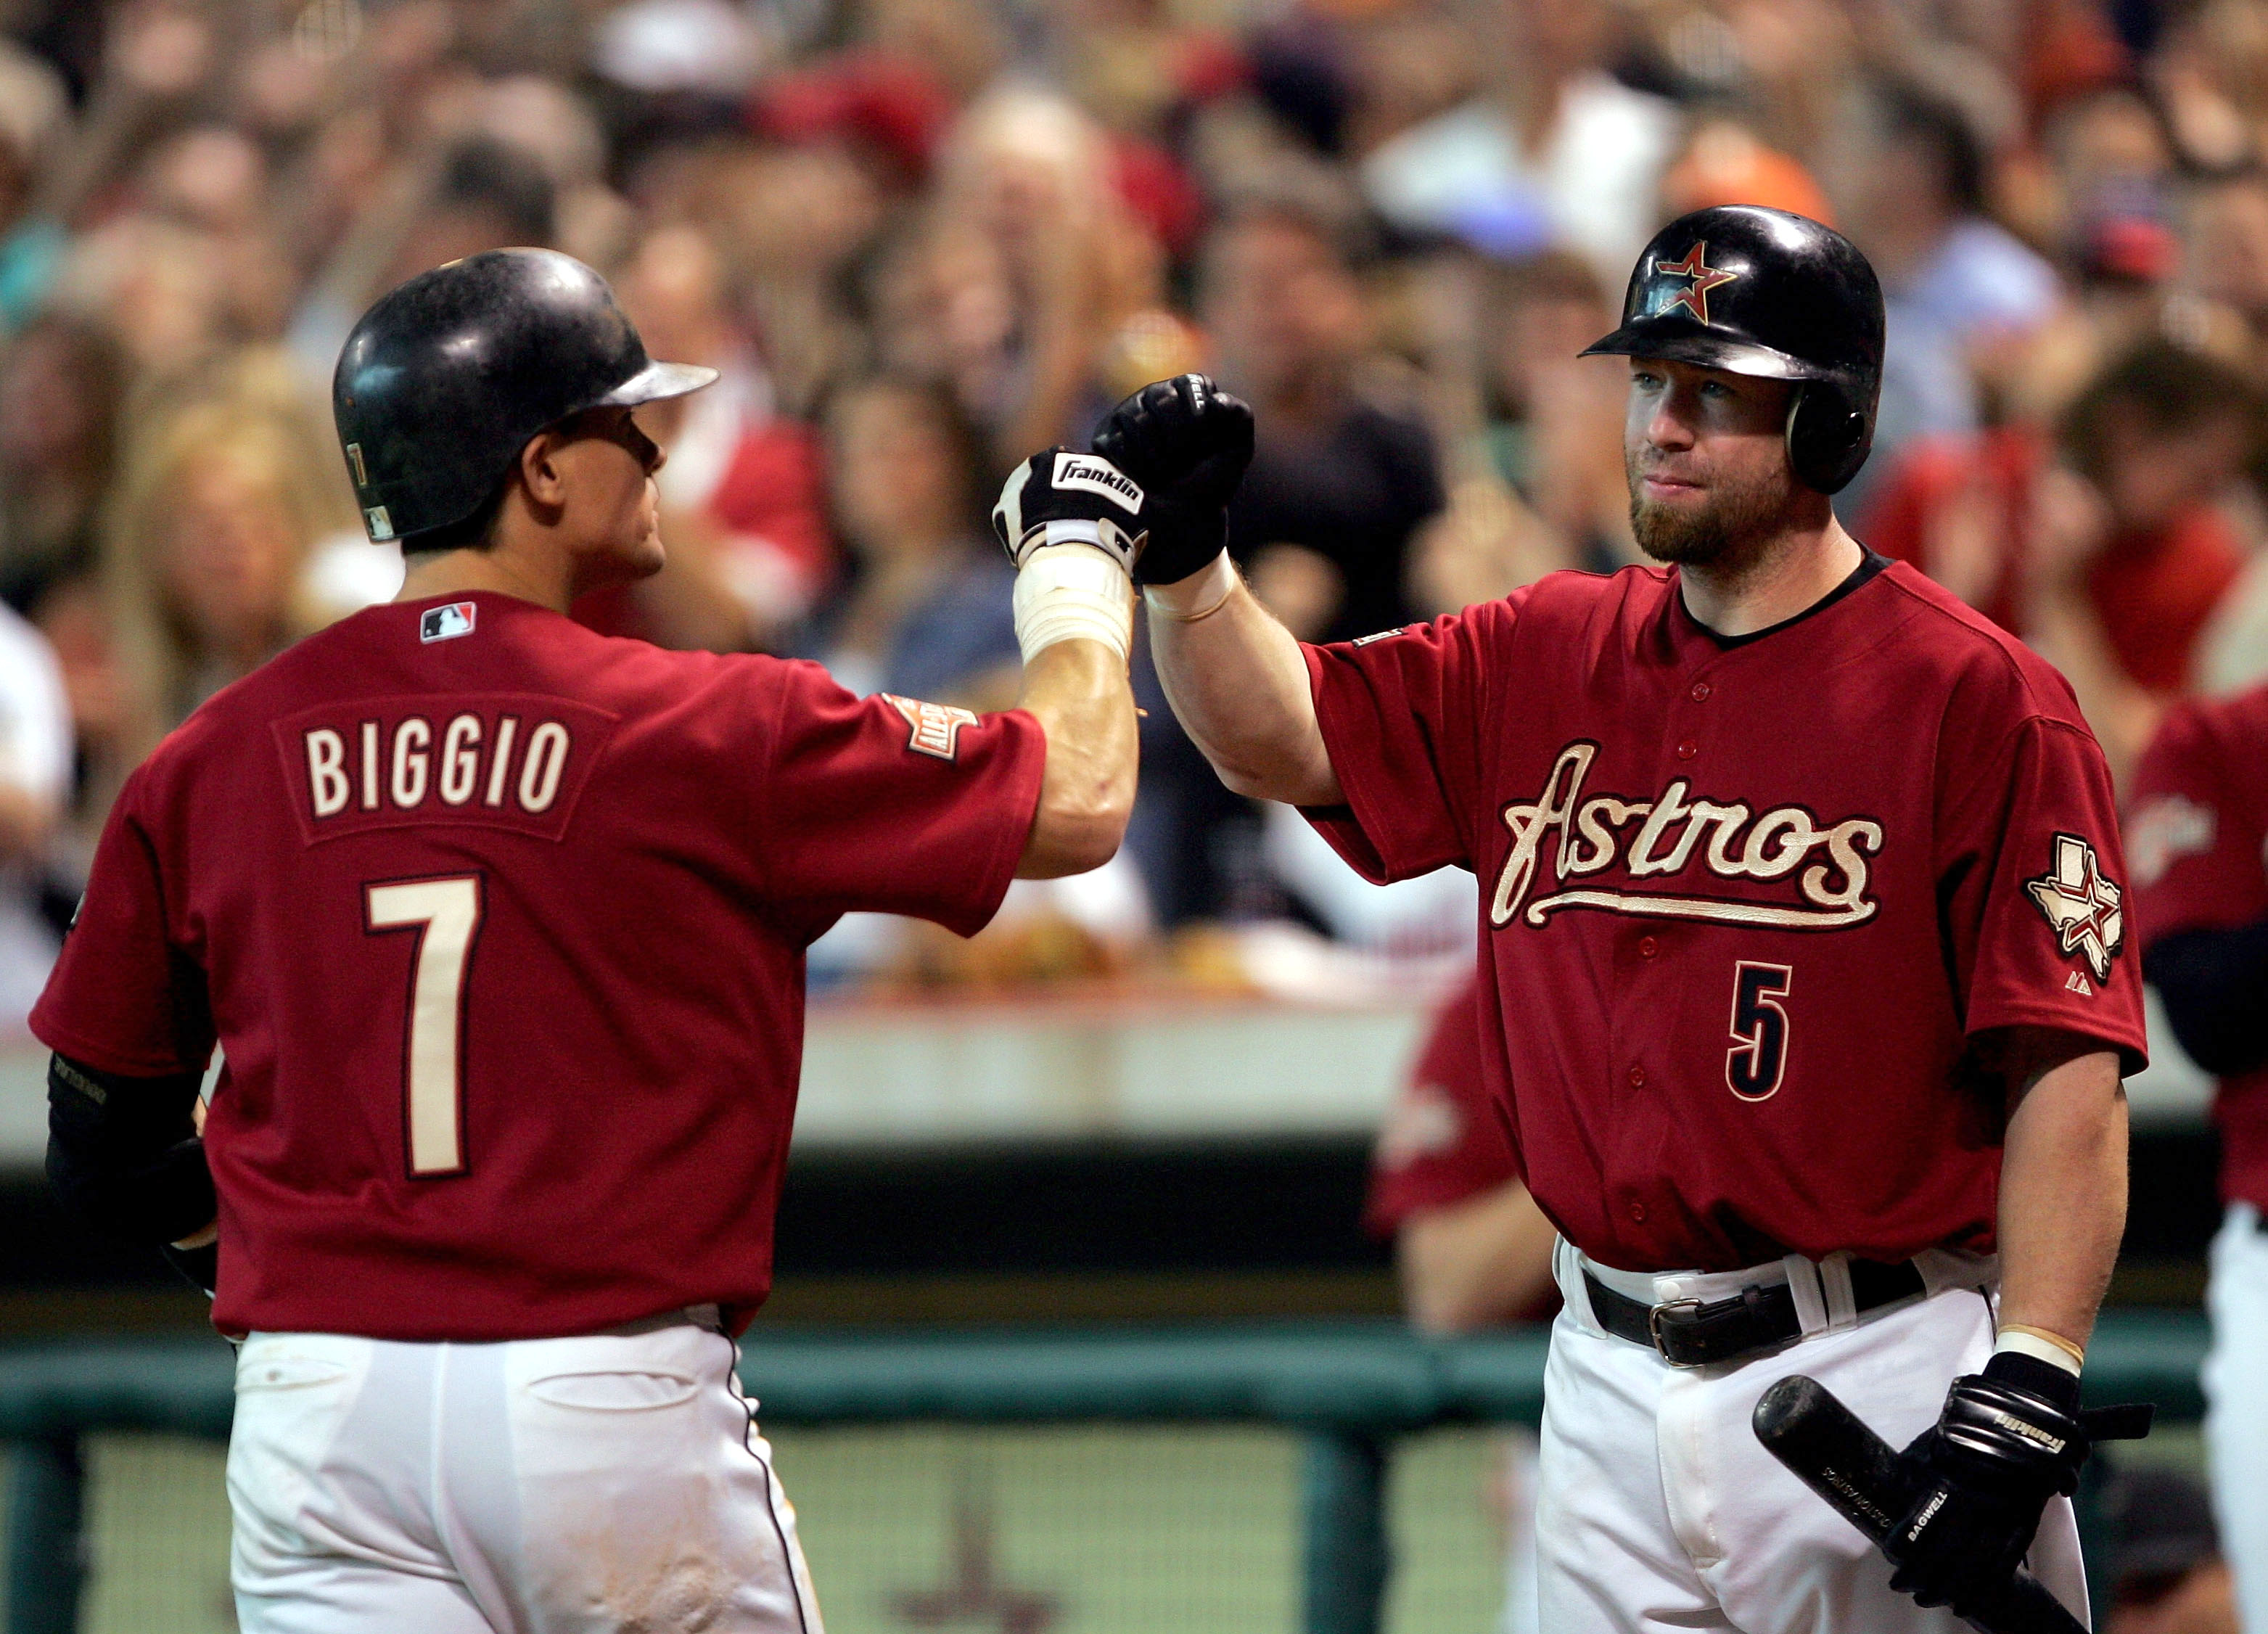 Jeff Bagwell could get into the Hall of Fame today